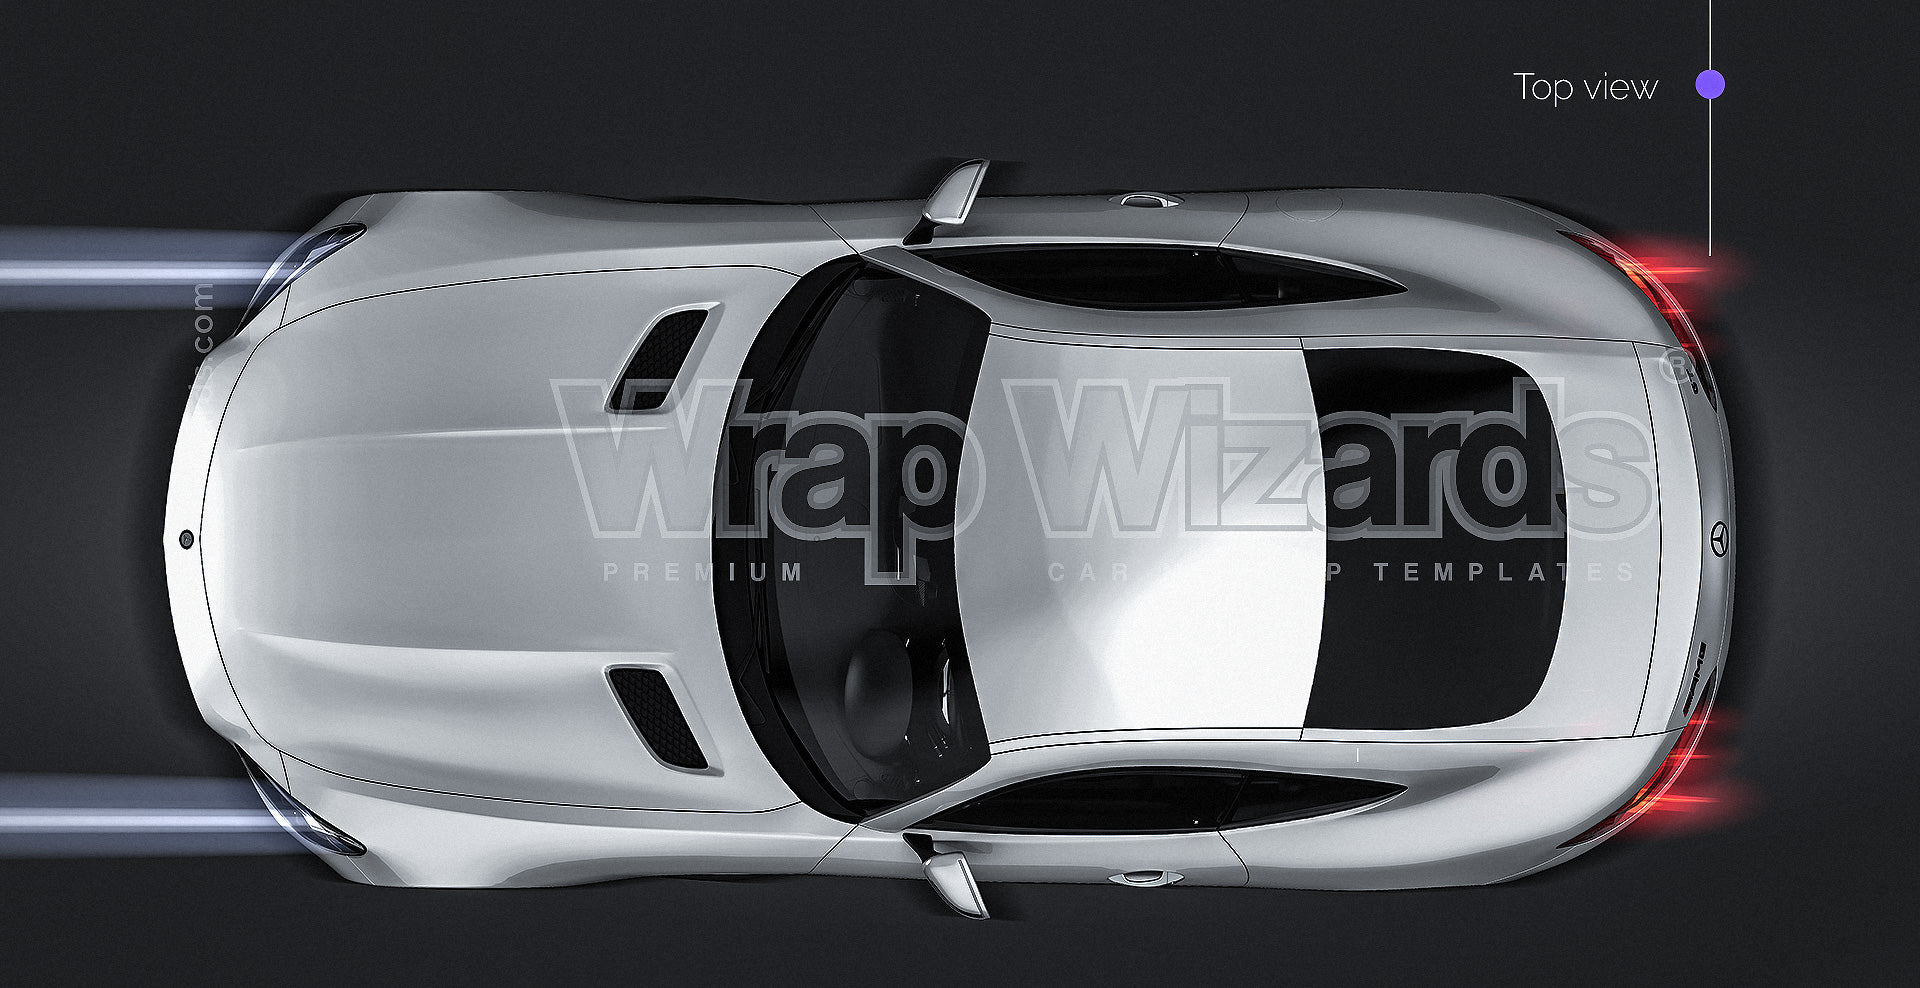 Mercedes-Benz AMG GT 2016 glossy finish - all sides Car Mockup Template.psd